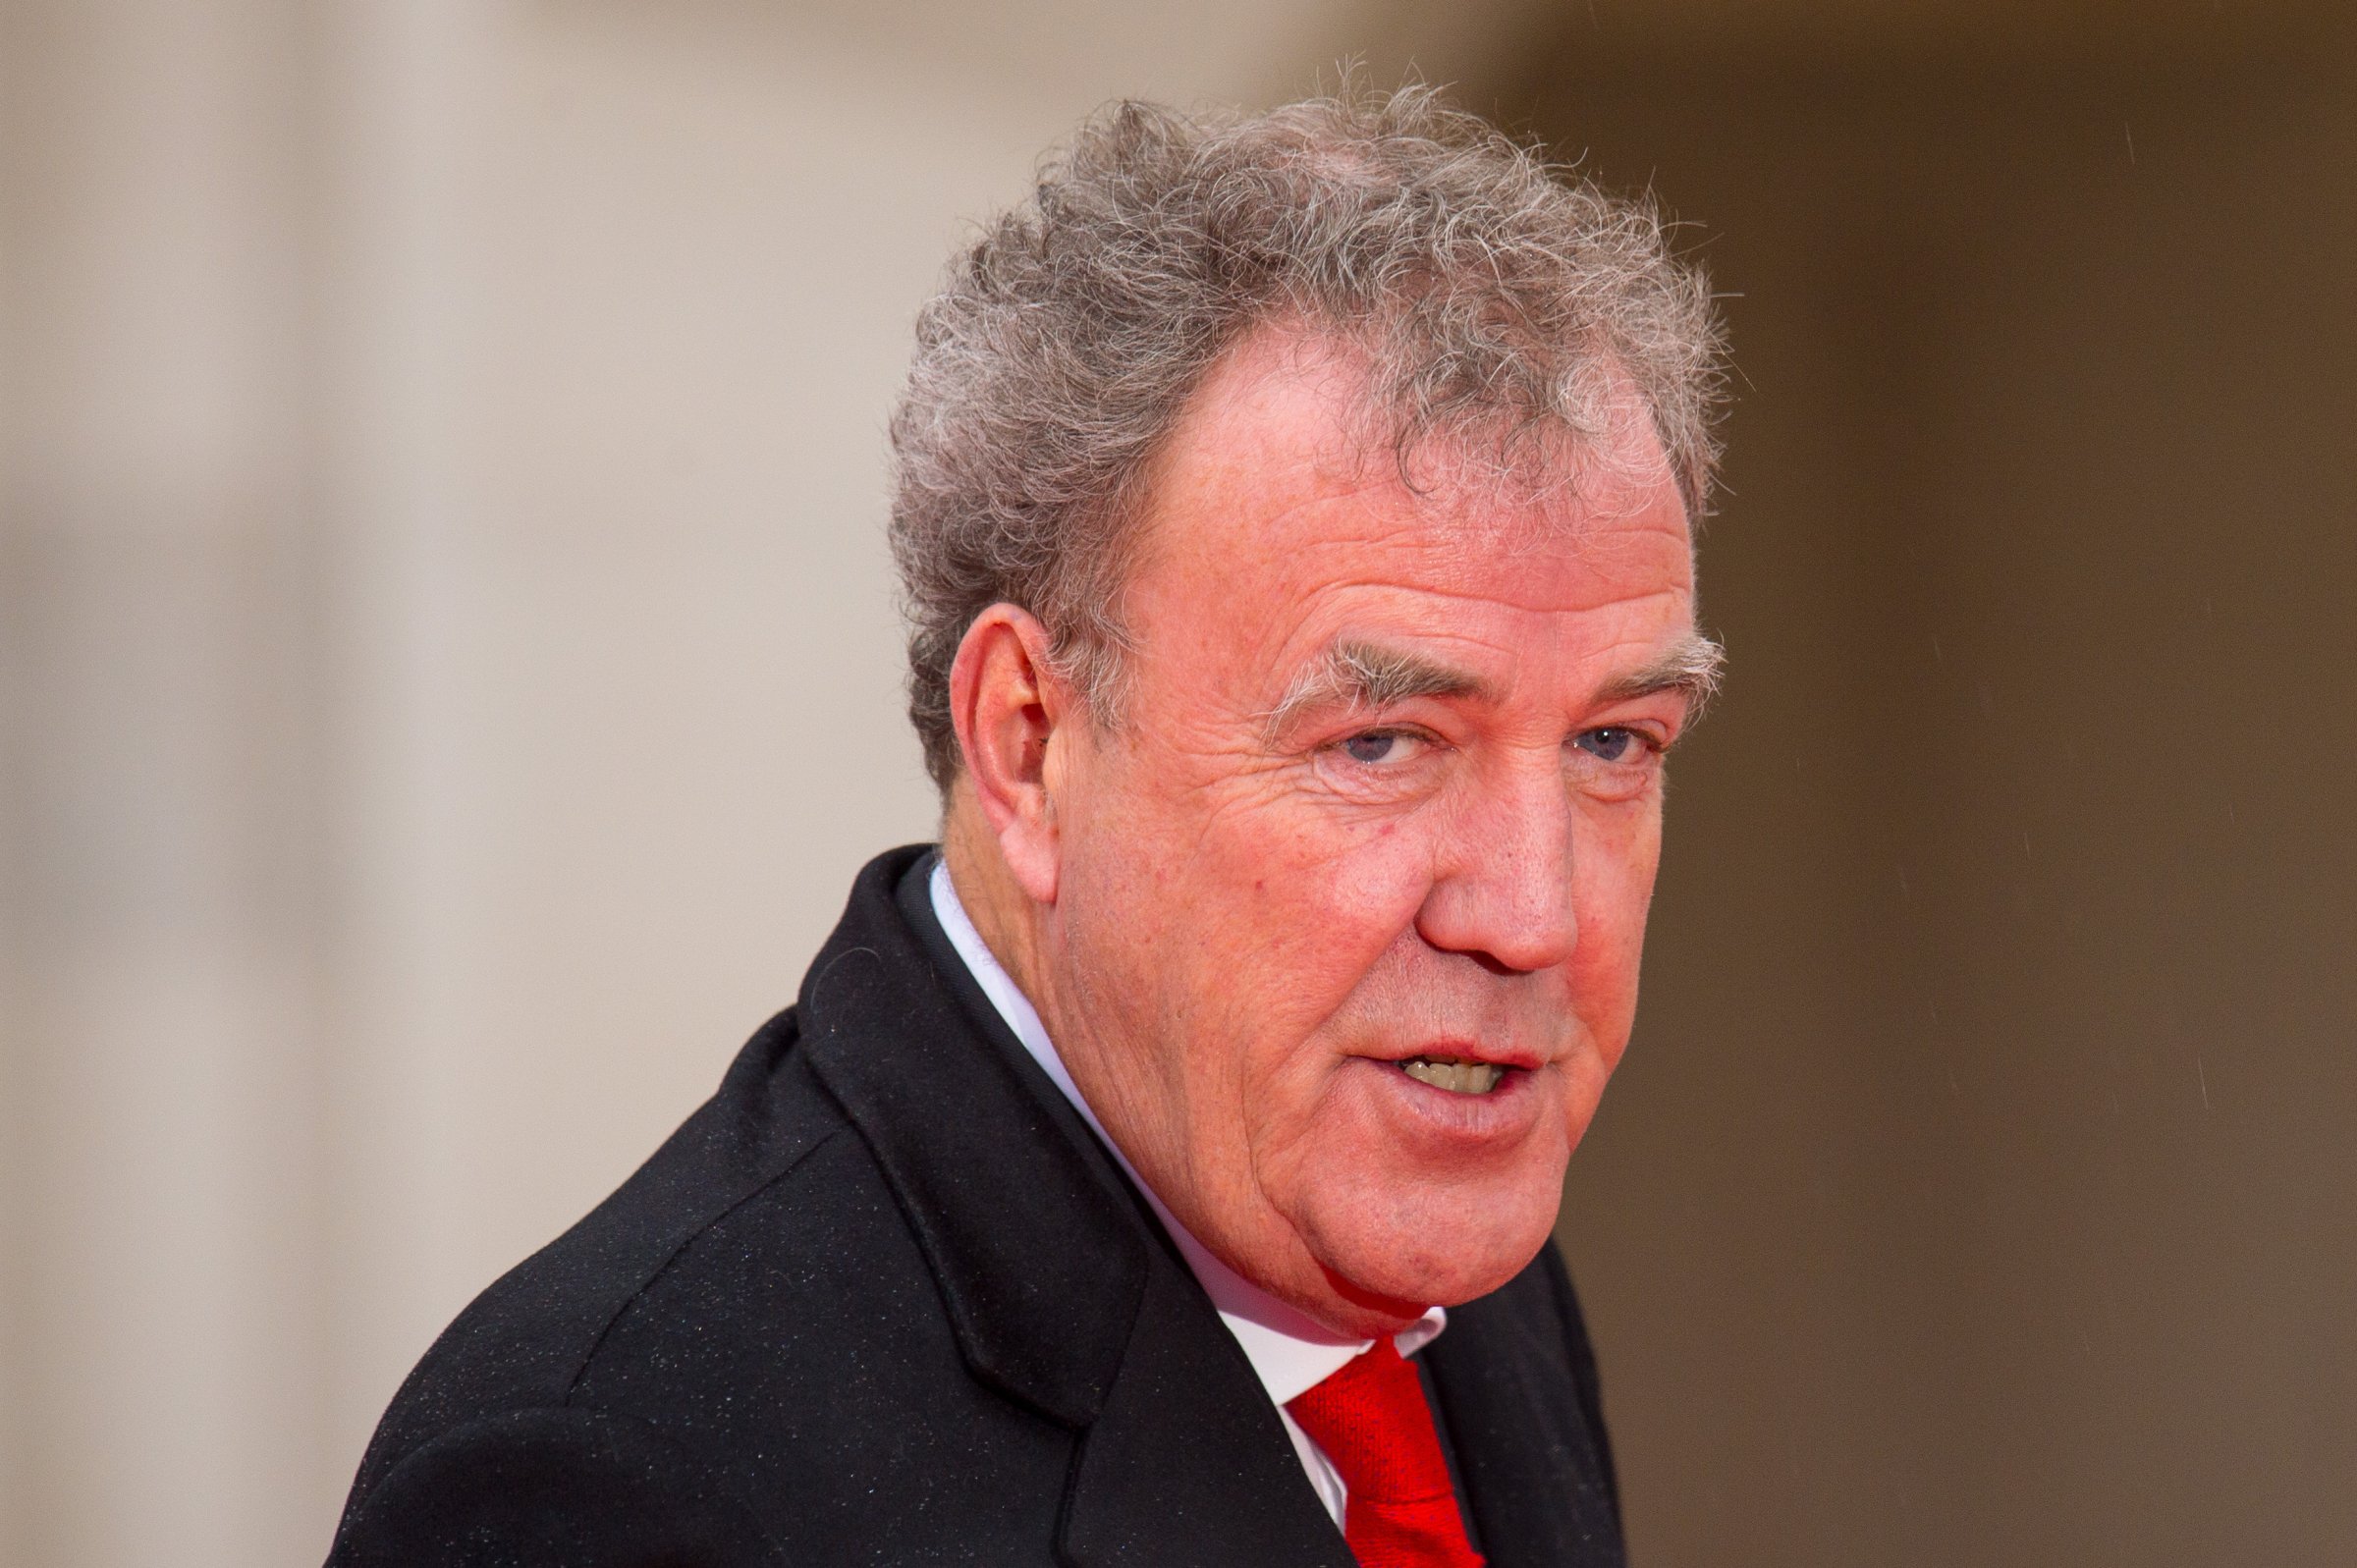 Jeremy Clarkson Apologies to Top Gear Producer and Settles Dispute